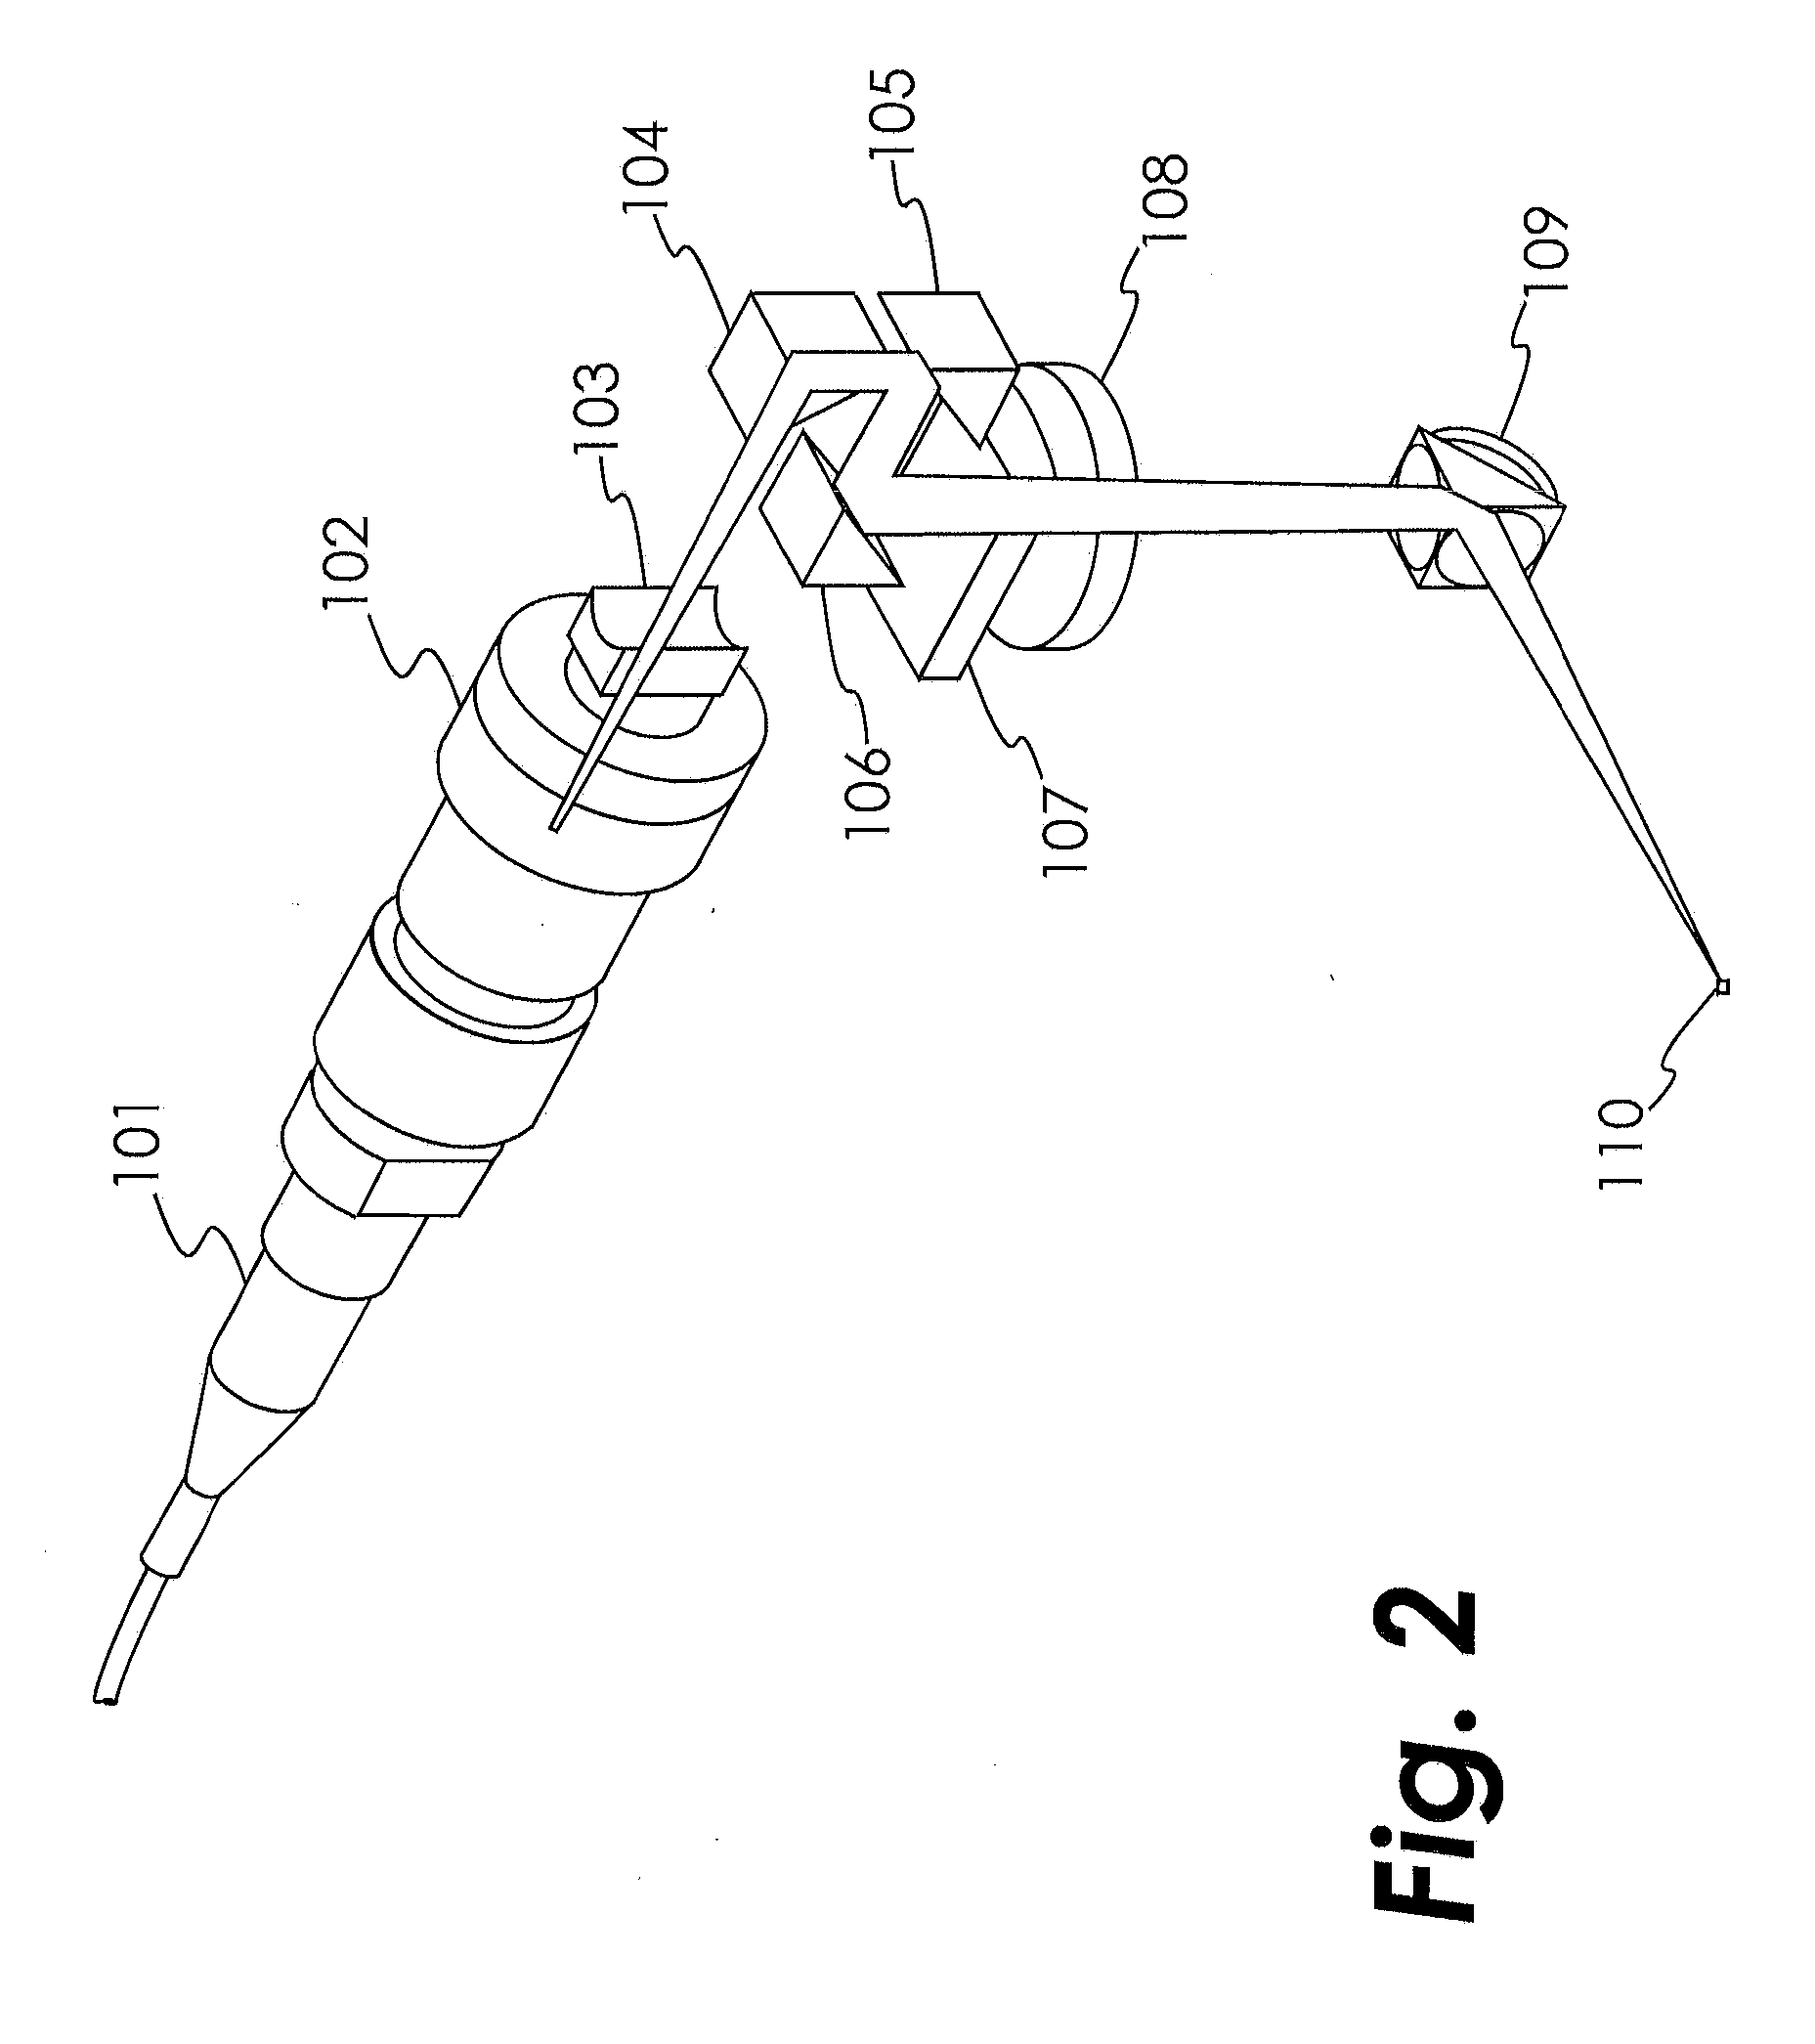 System and method for measuring narrow and wide angle light scatter on a high-speed cell sorting device